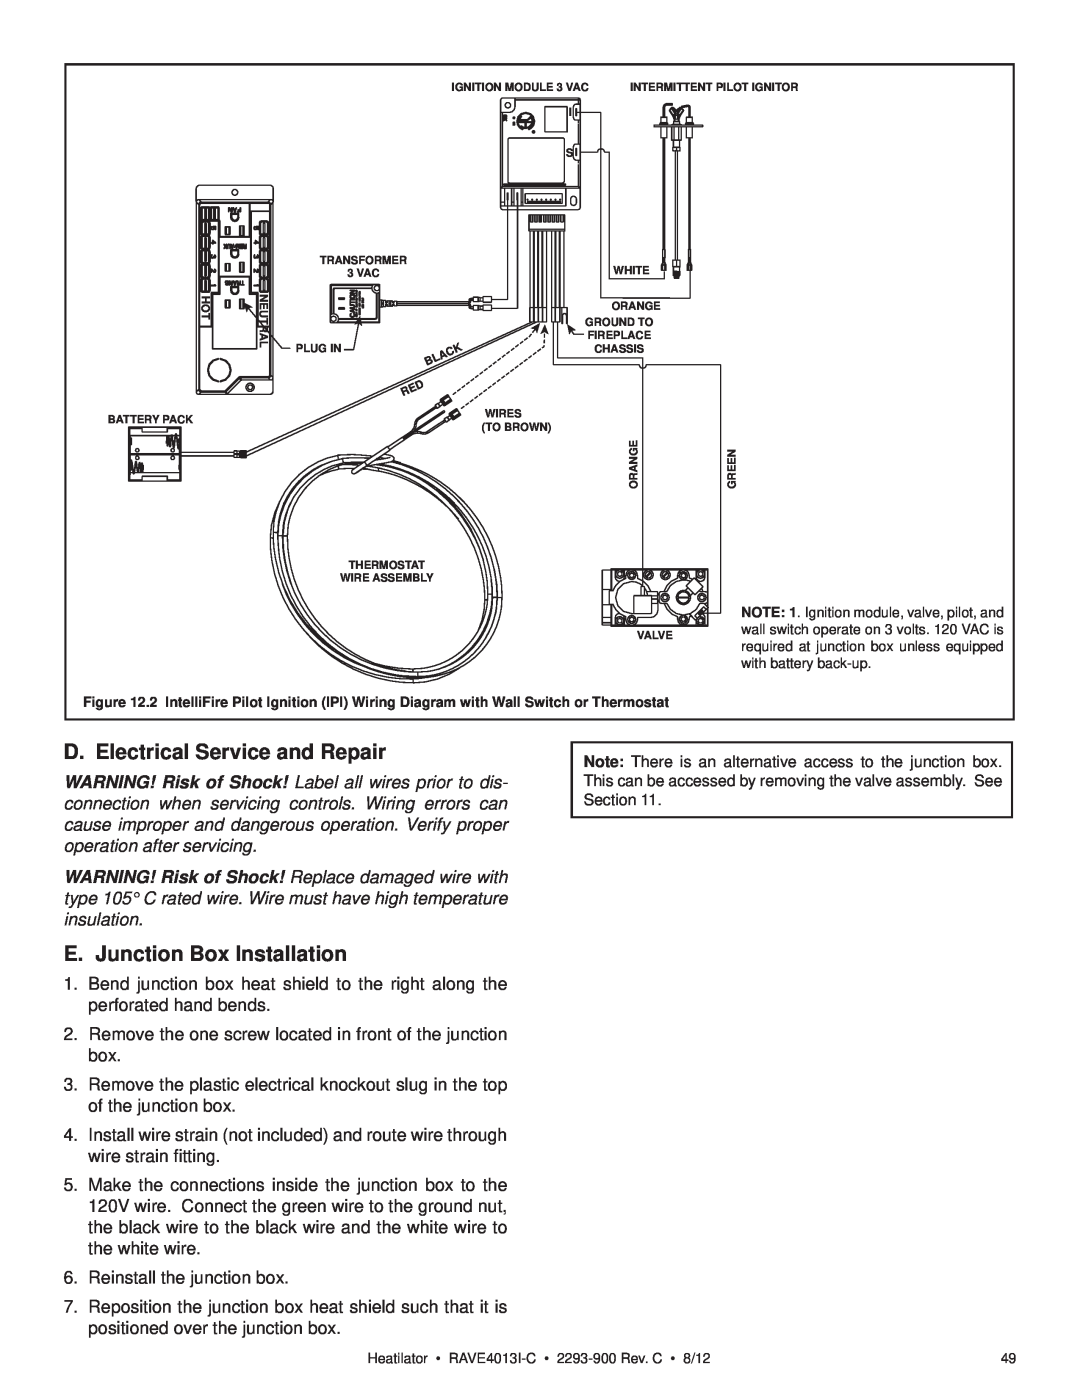 Heatiator Rave4013i-c owner manual D. Electrical Service and Repair, E. Junction Box Installation 